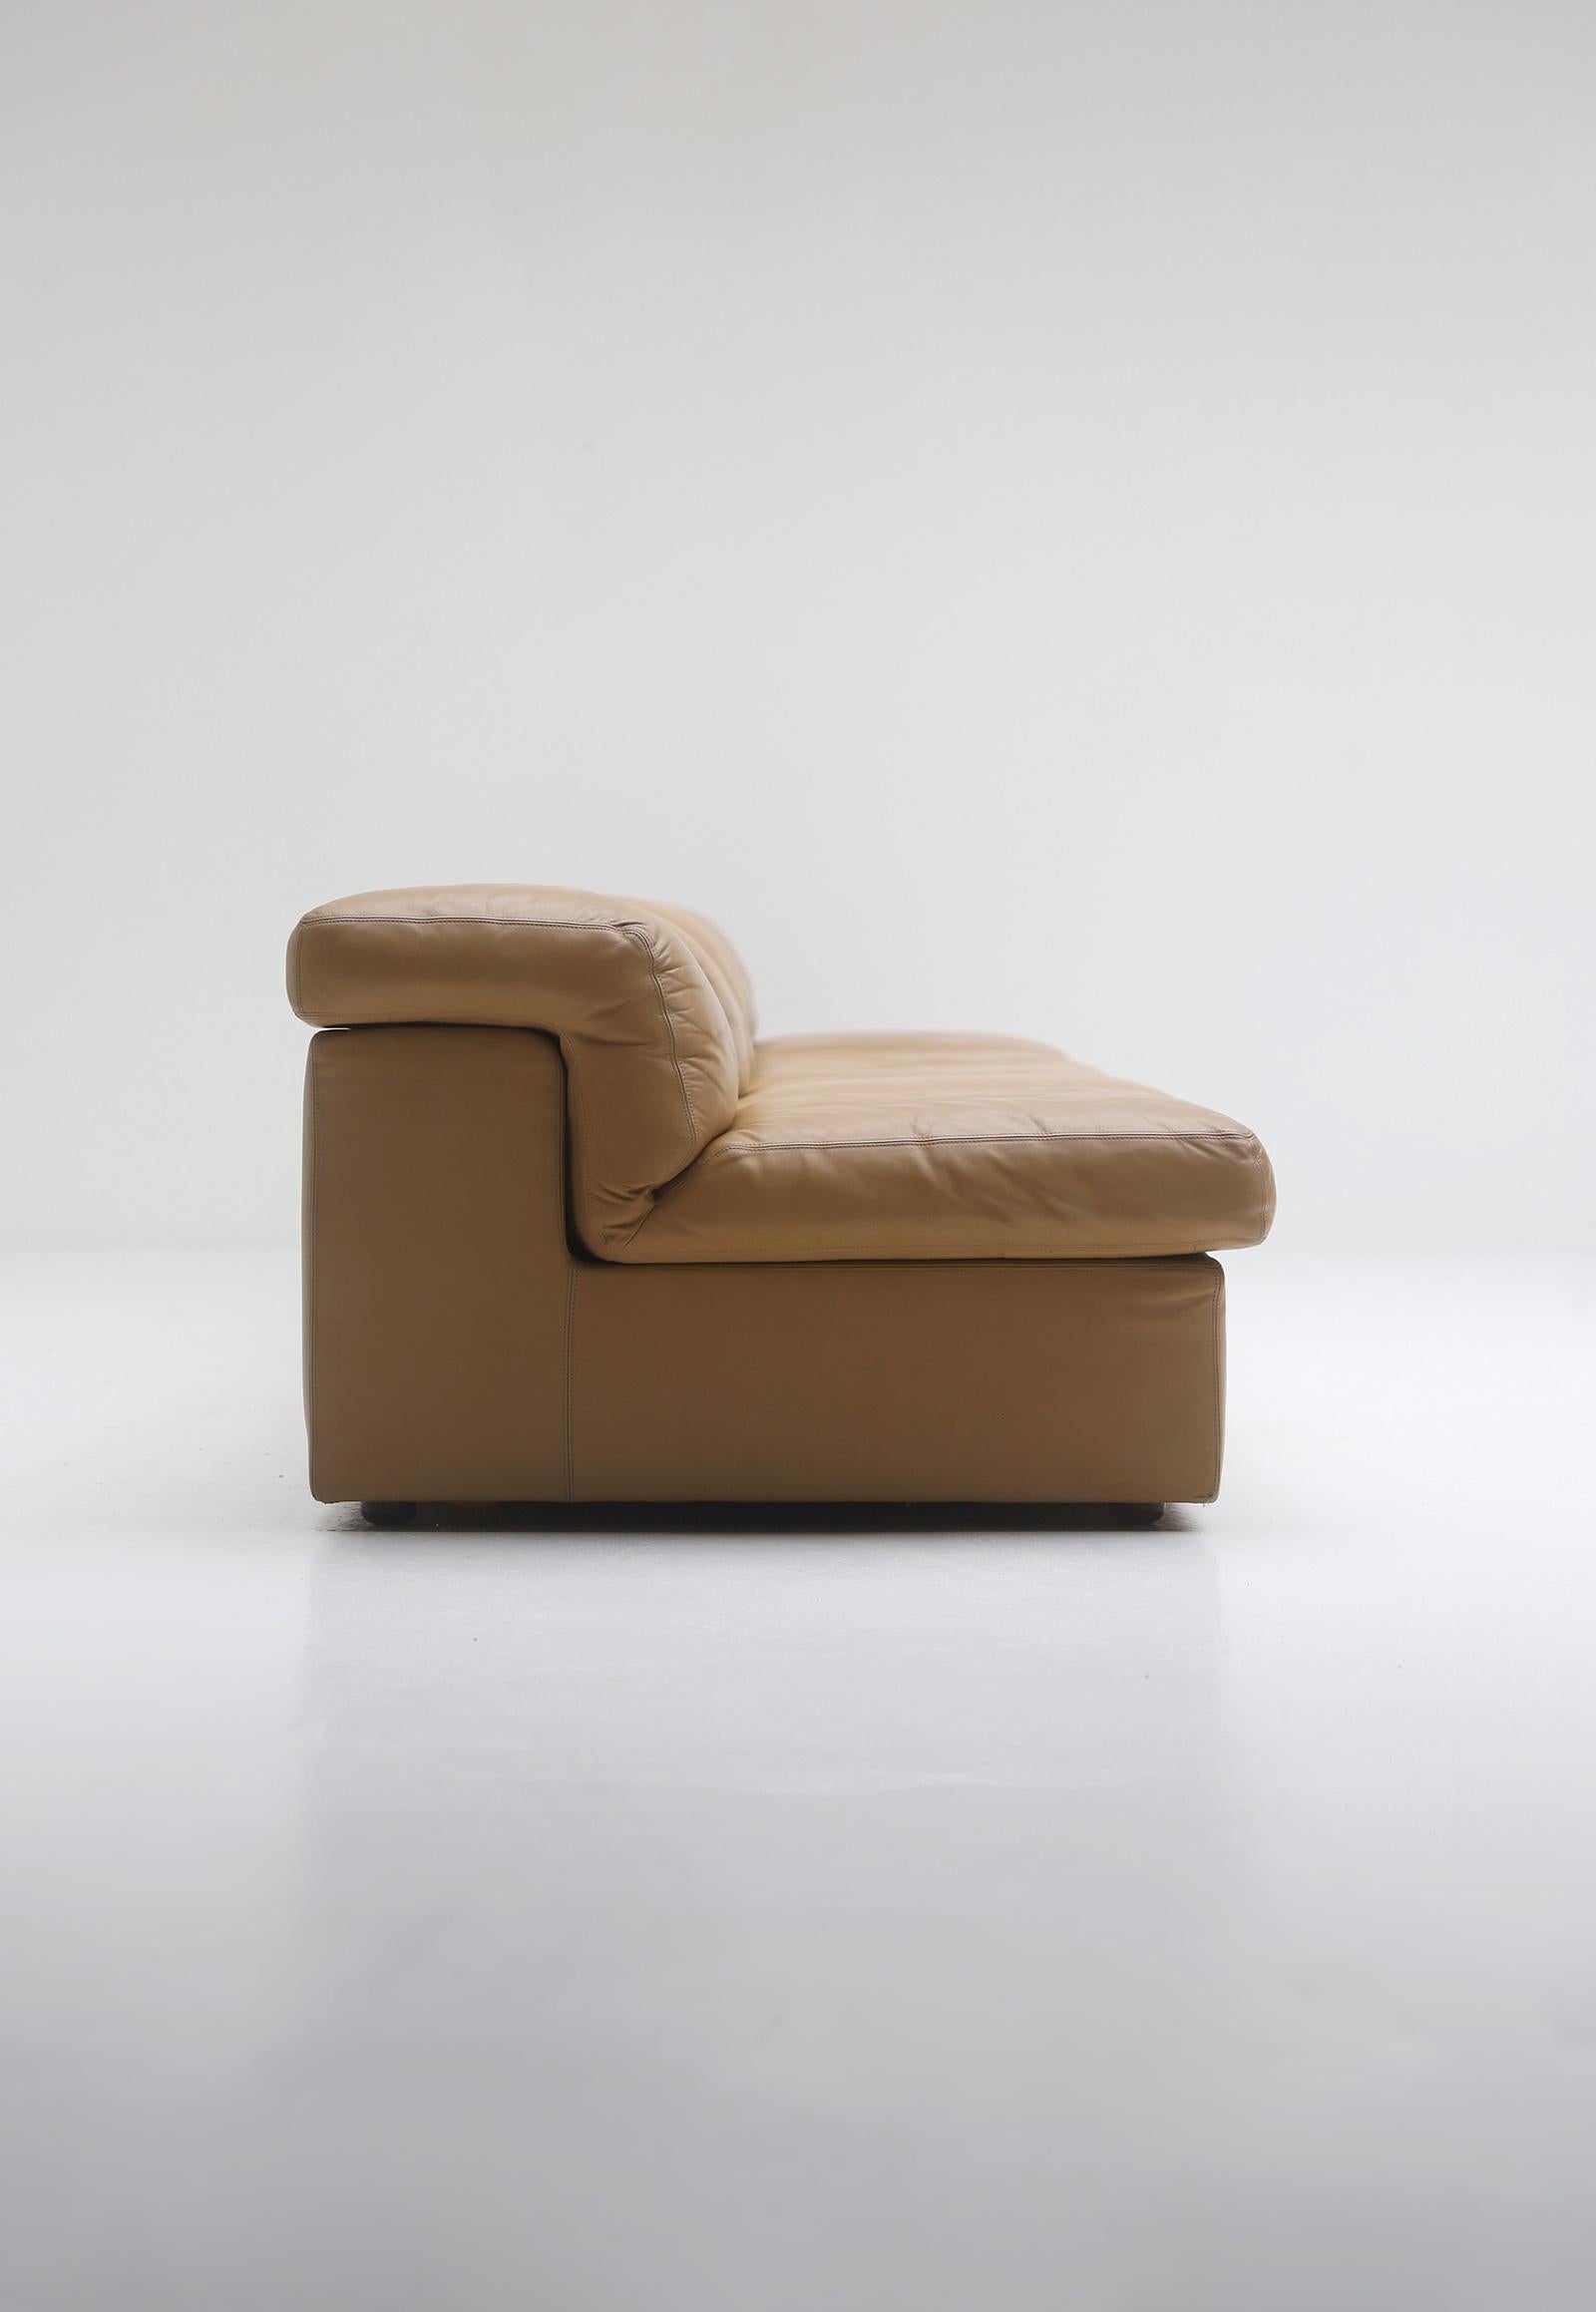 Modular Jeep Sofa, Manufactured by Durlet, Belgium, 1970s 1